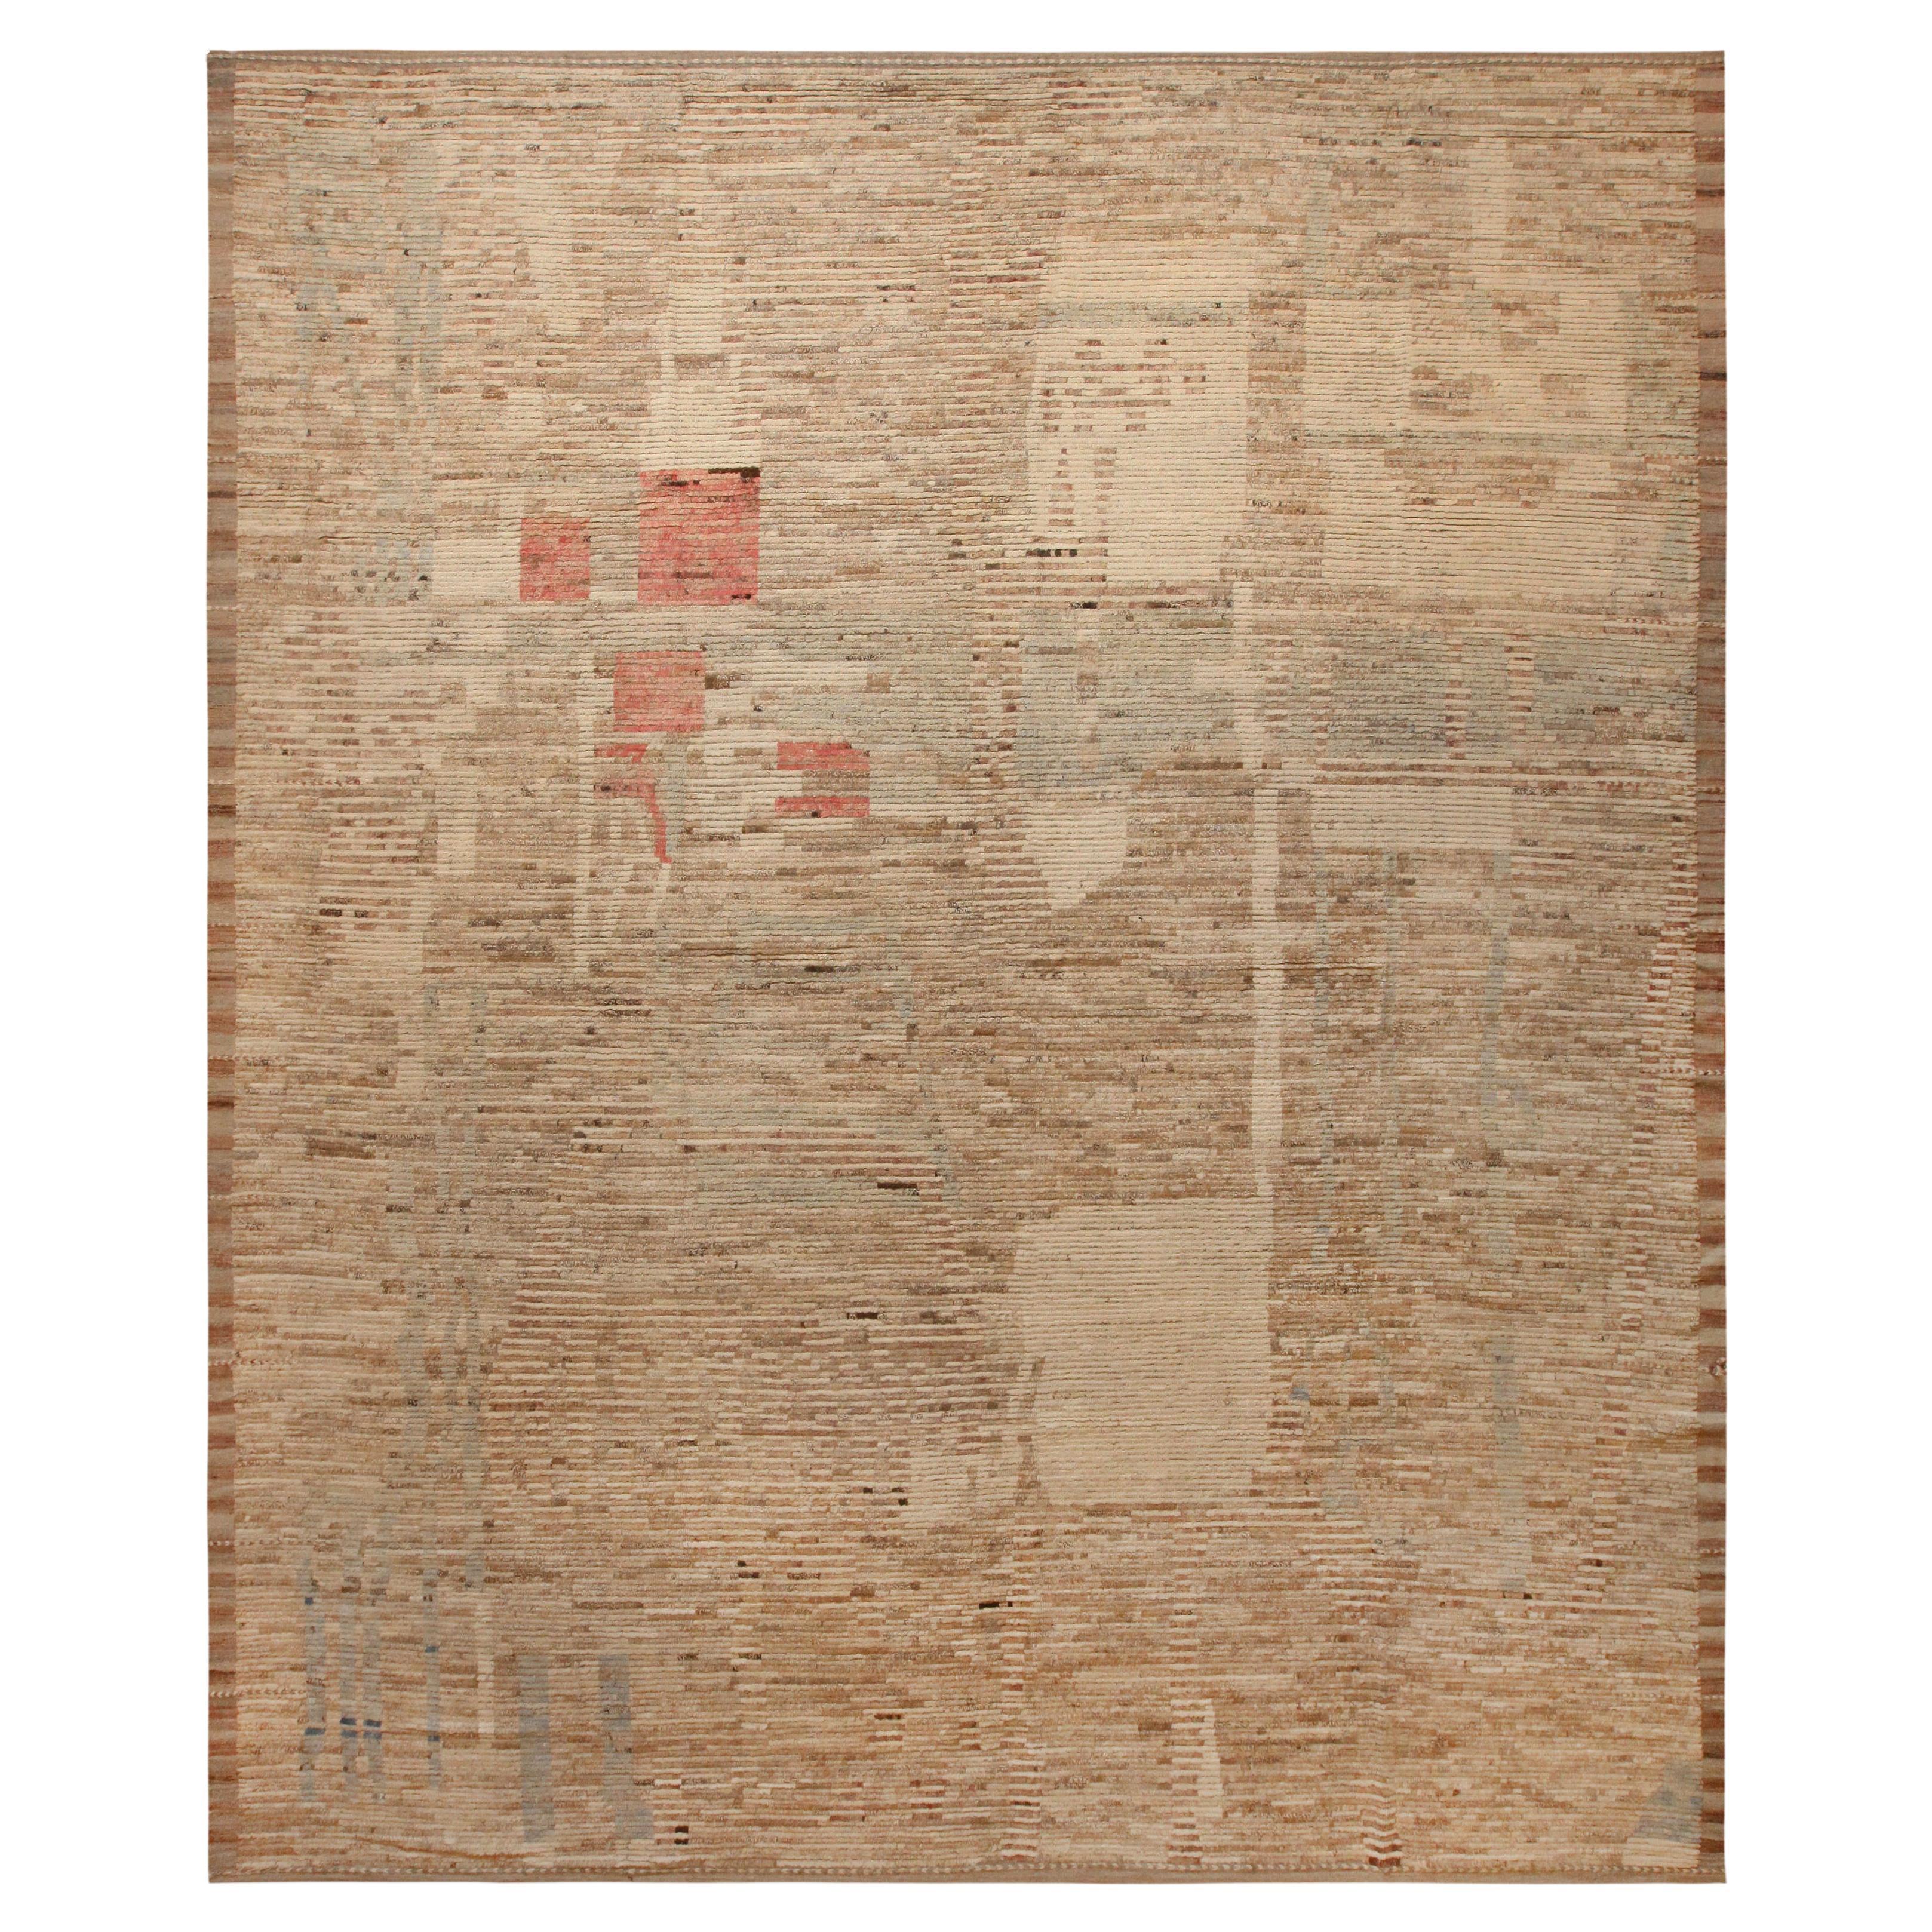 Nazmiyal Collection Large Earthy Tones Trendy Modern Rug 14' x 16'6" For Sale